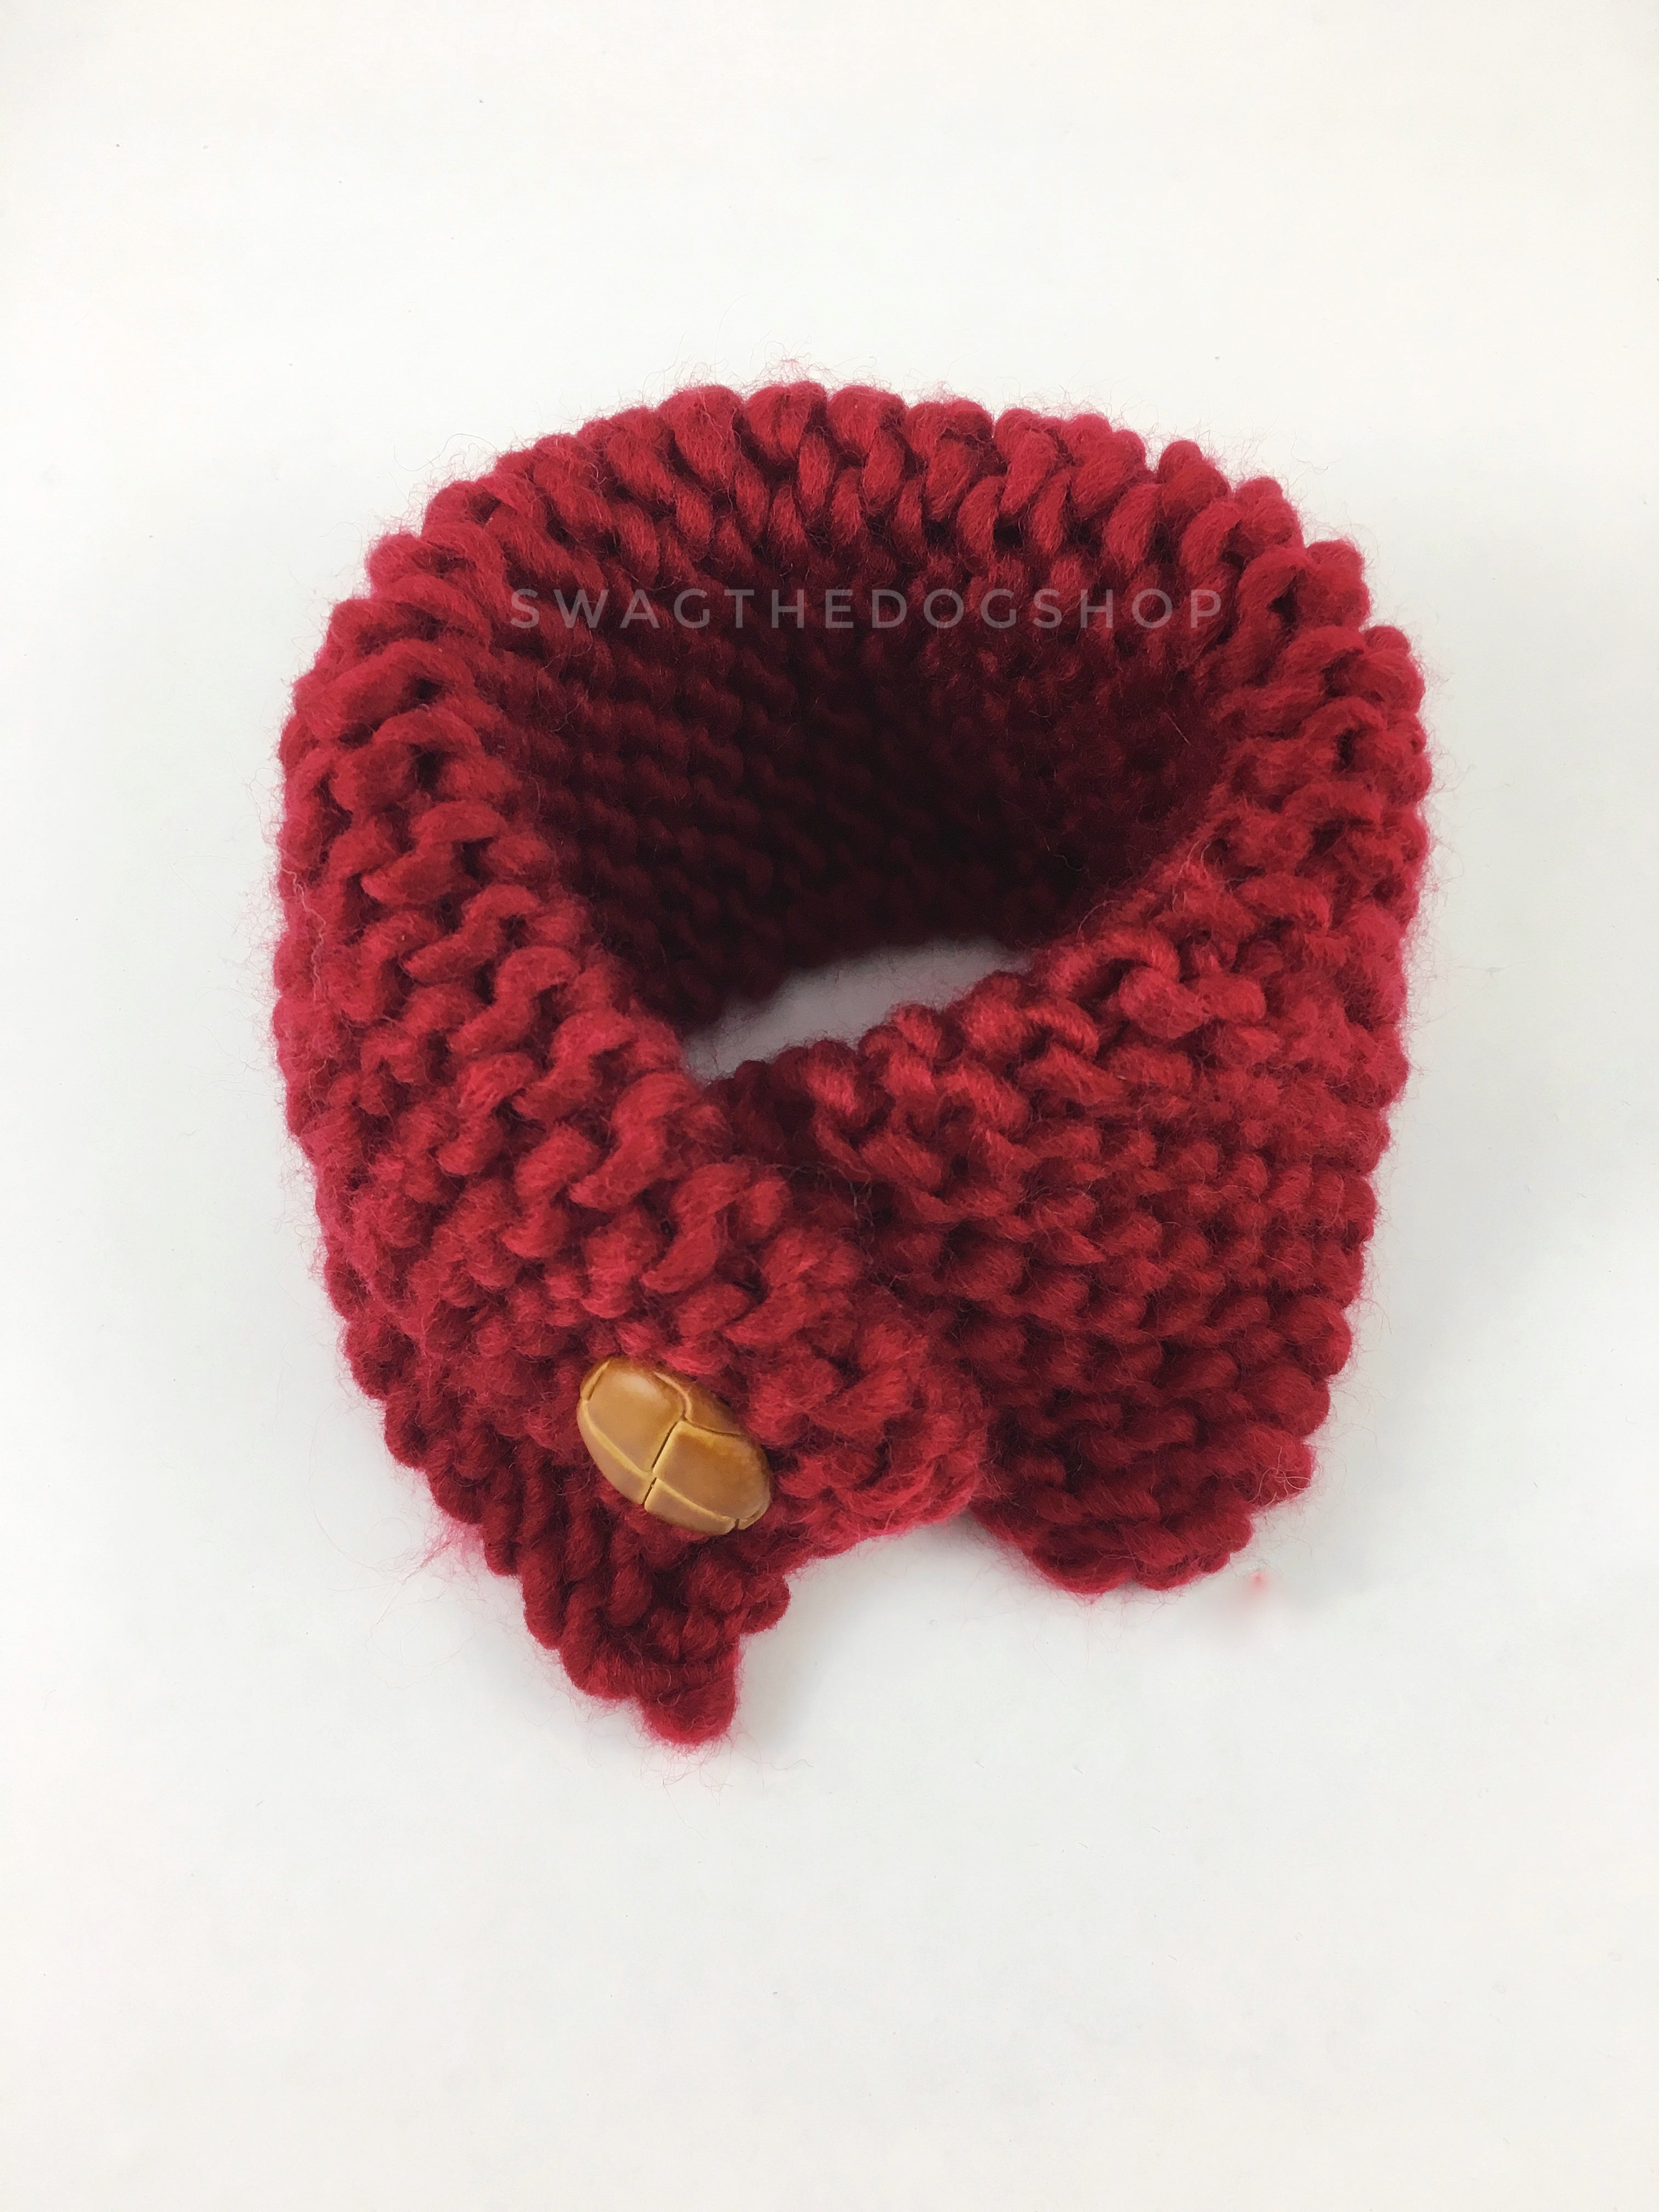 Maroon 7 Swagsnood - Product Above View. Maroon Color Dog Snood with Accent Button